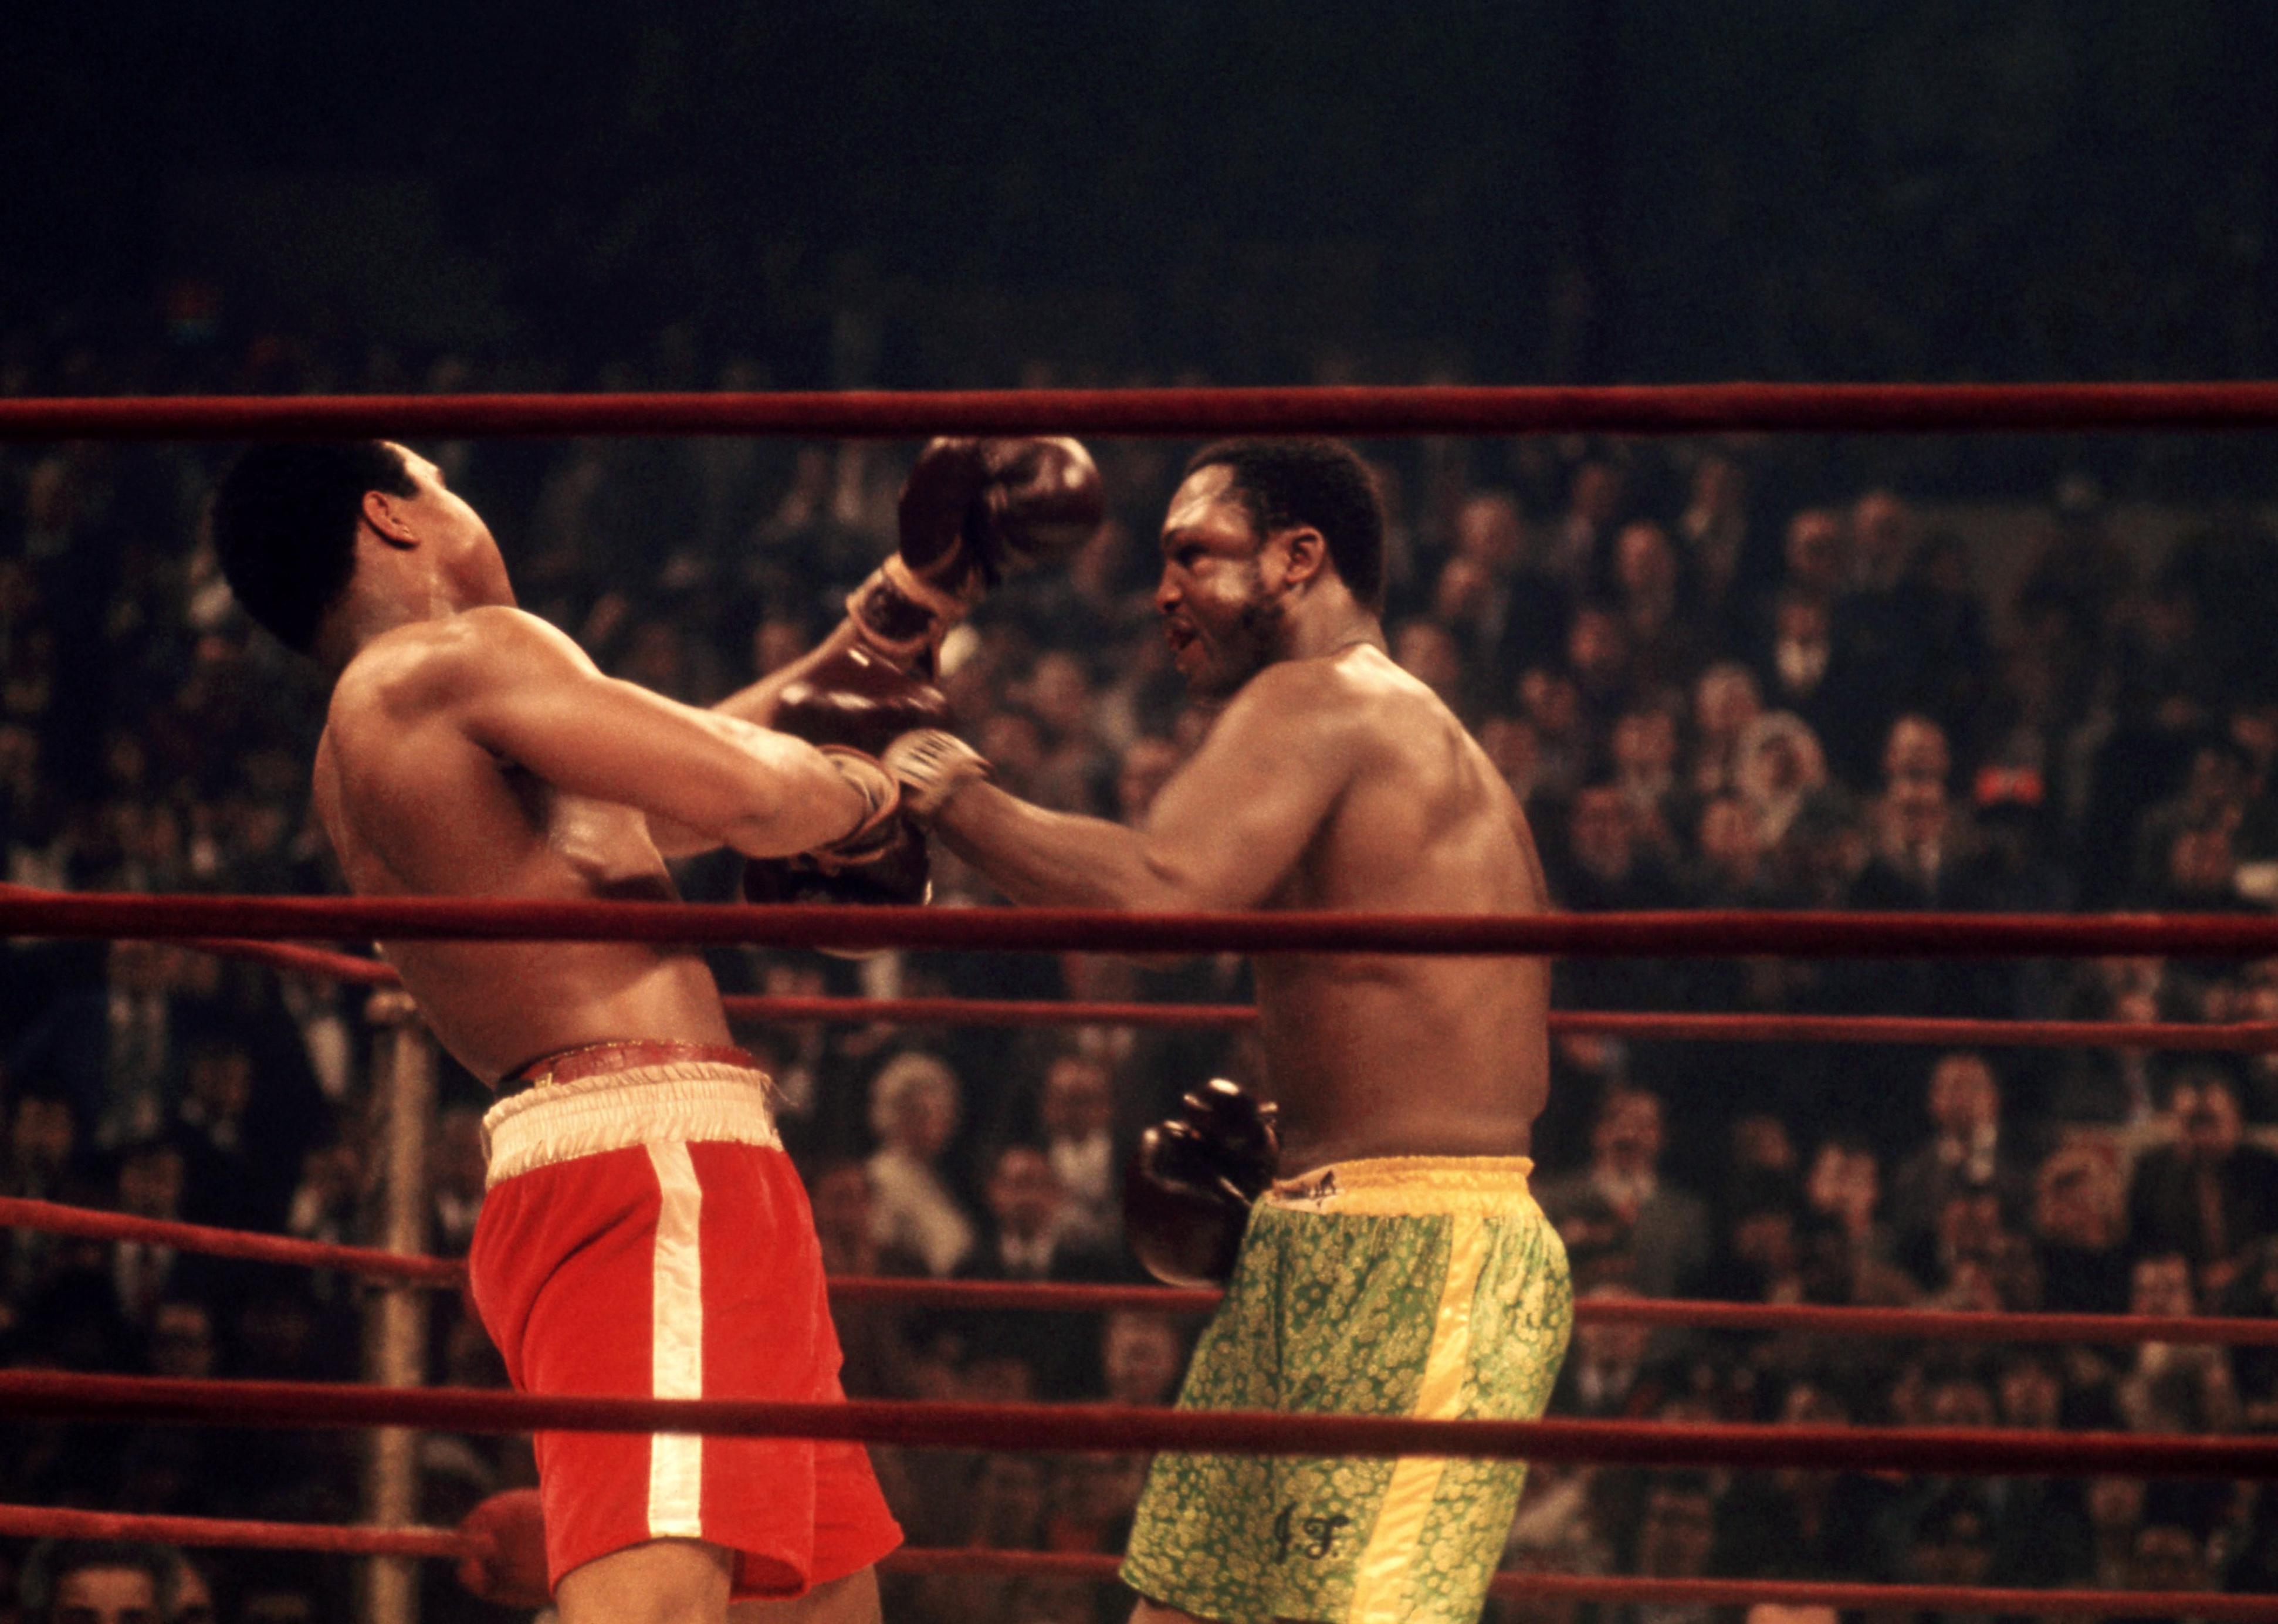 Muhammad Ali takes a punch from Joe Frazier during their 'Fight of the Century'.